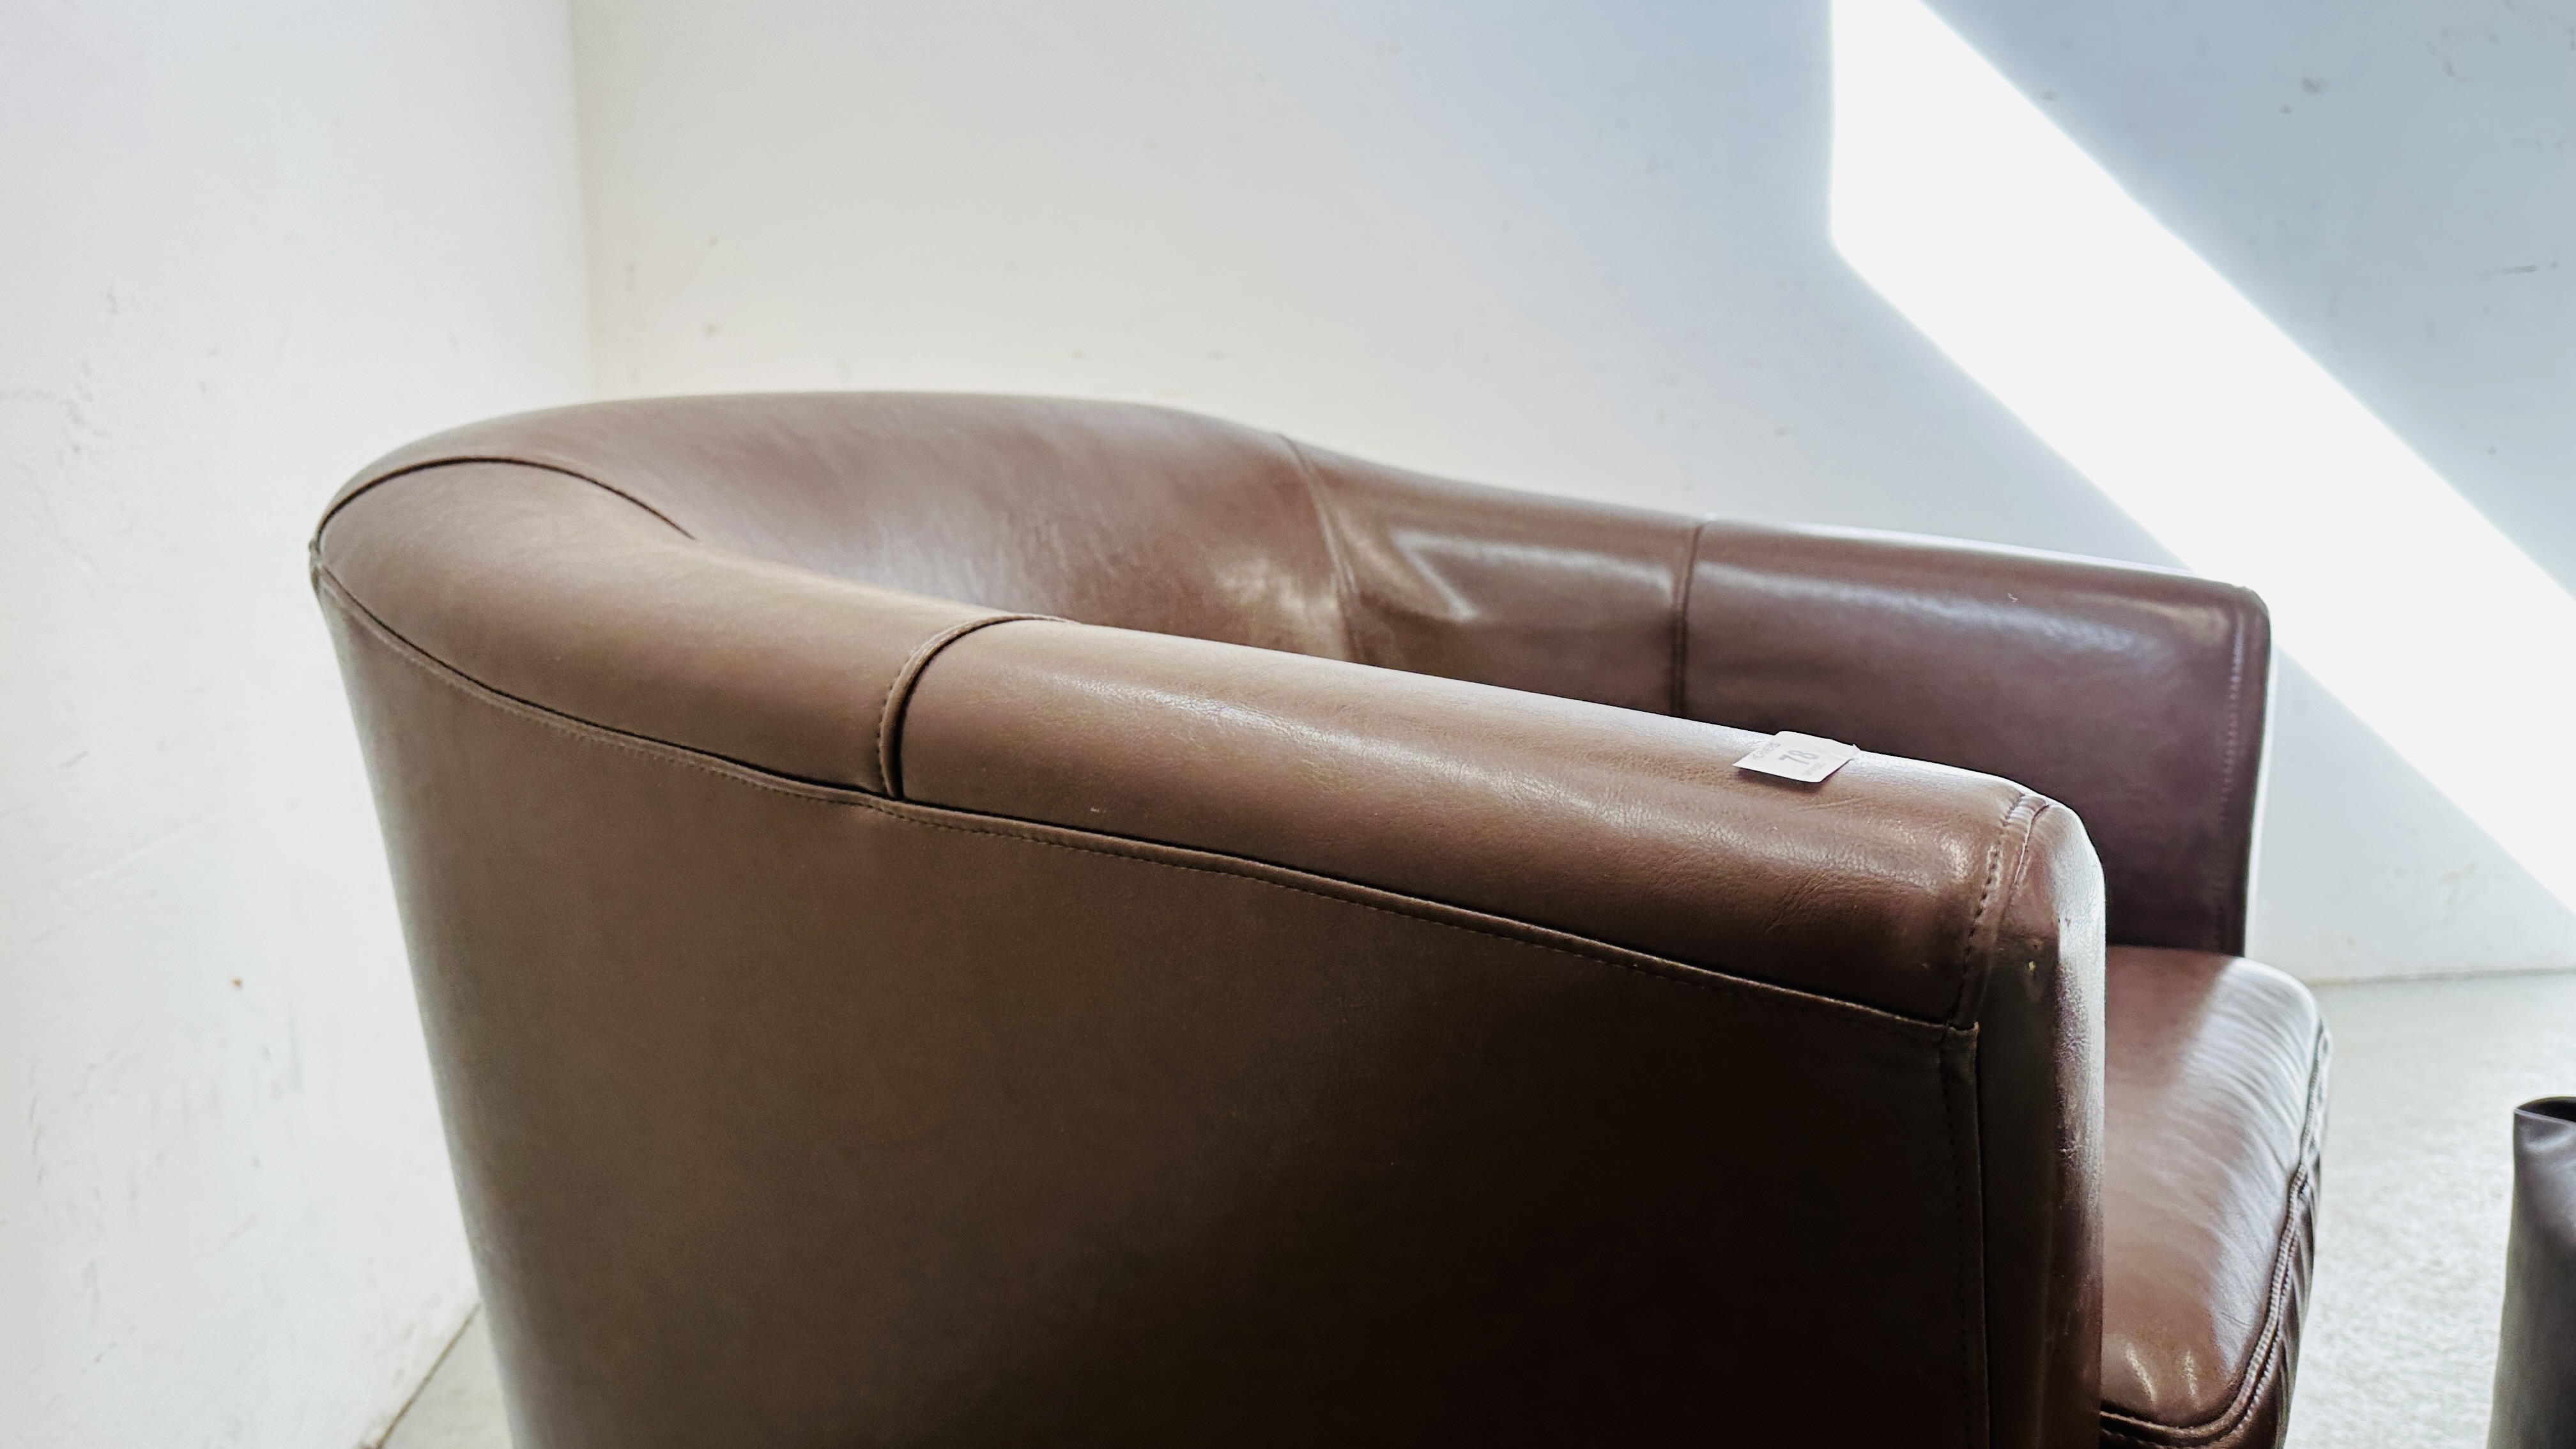 A MODERN BROWN FAUX LEATHER TUB CHAIR ALONG WITH MATCHING BEAN BAG FOOT REST. - Image 8 of 11